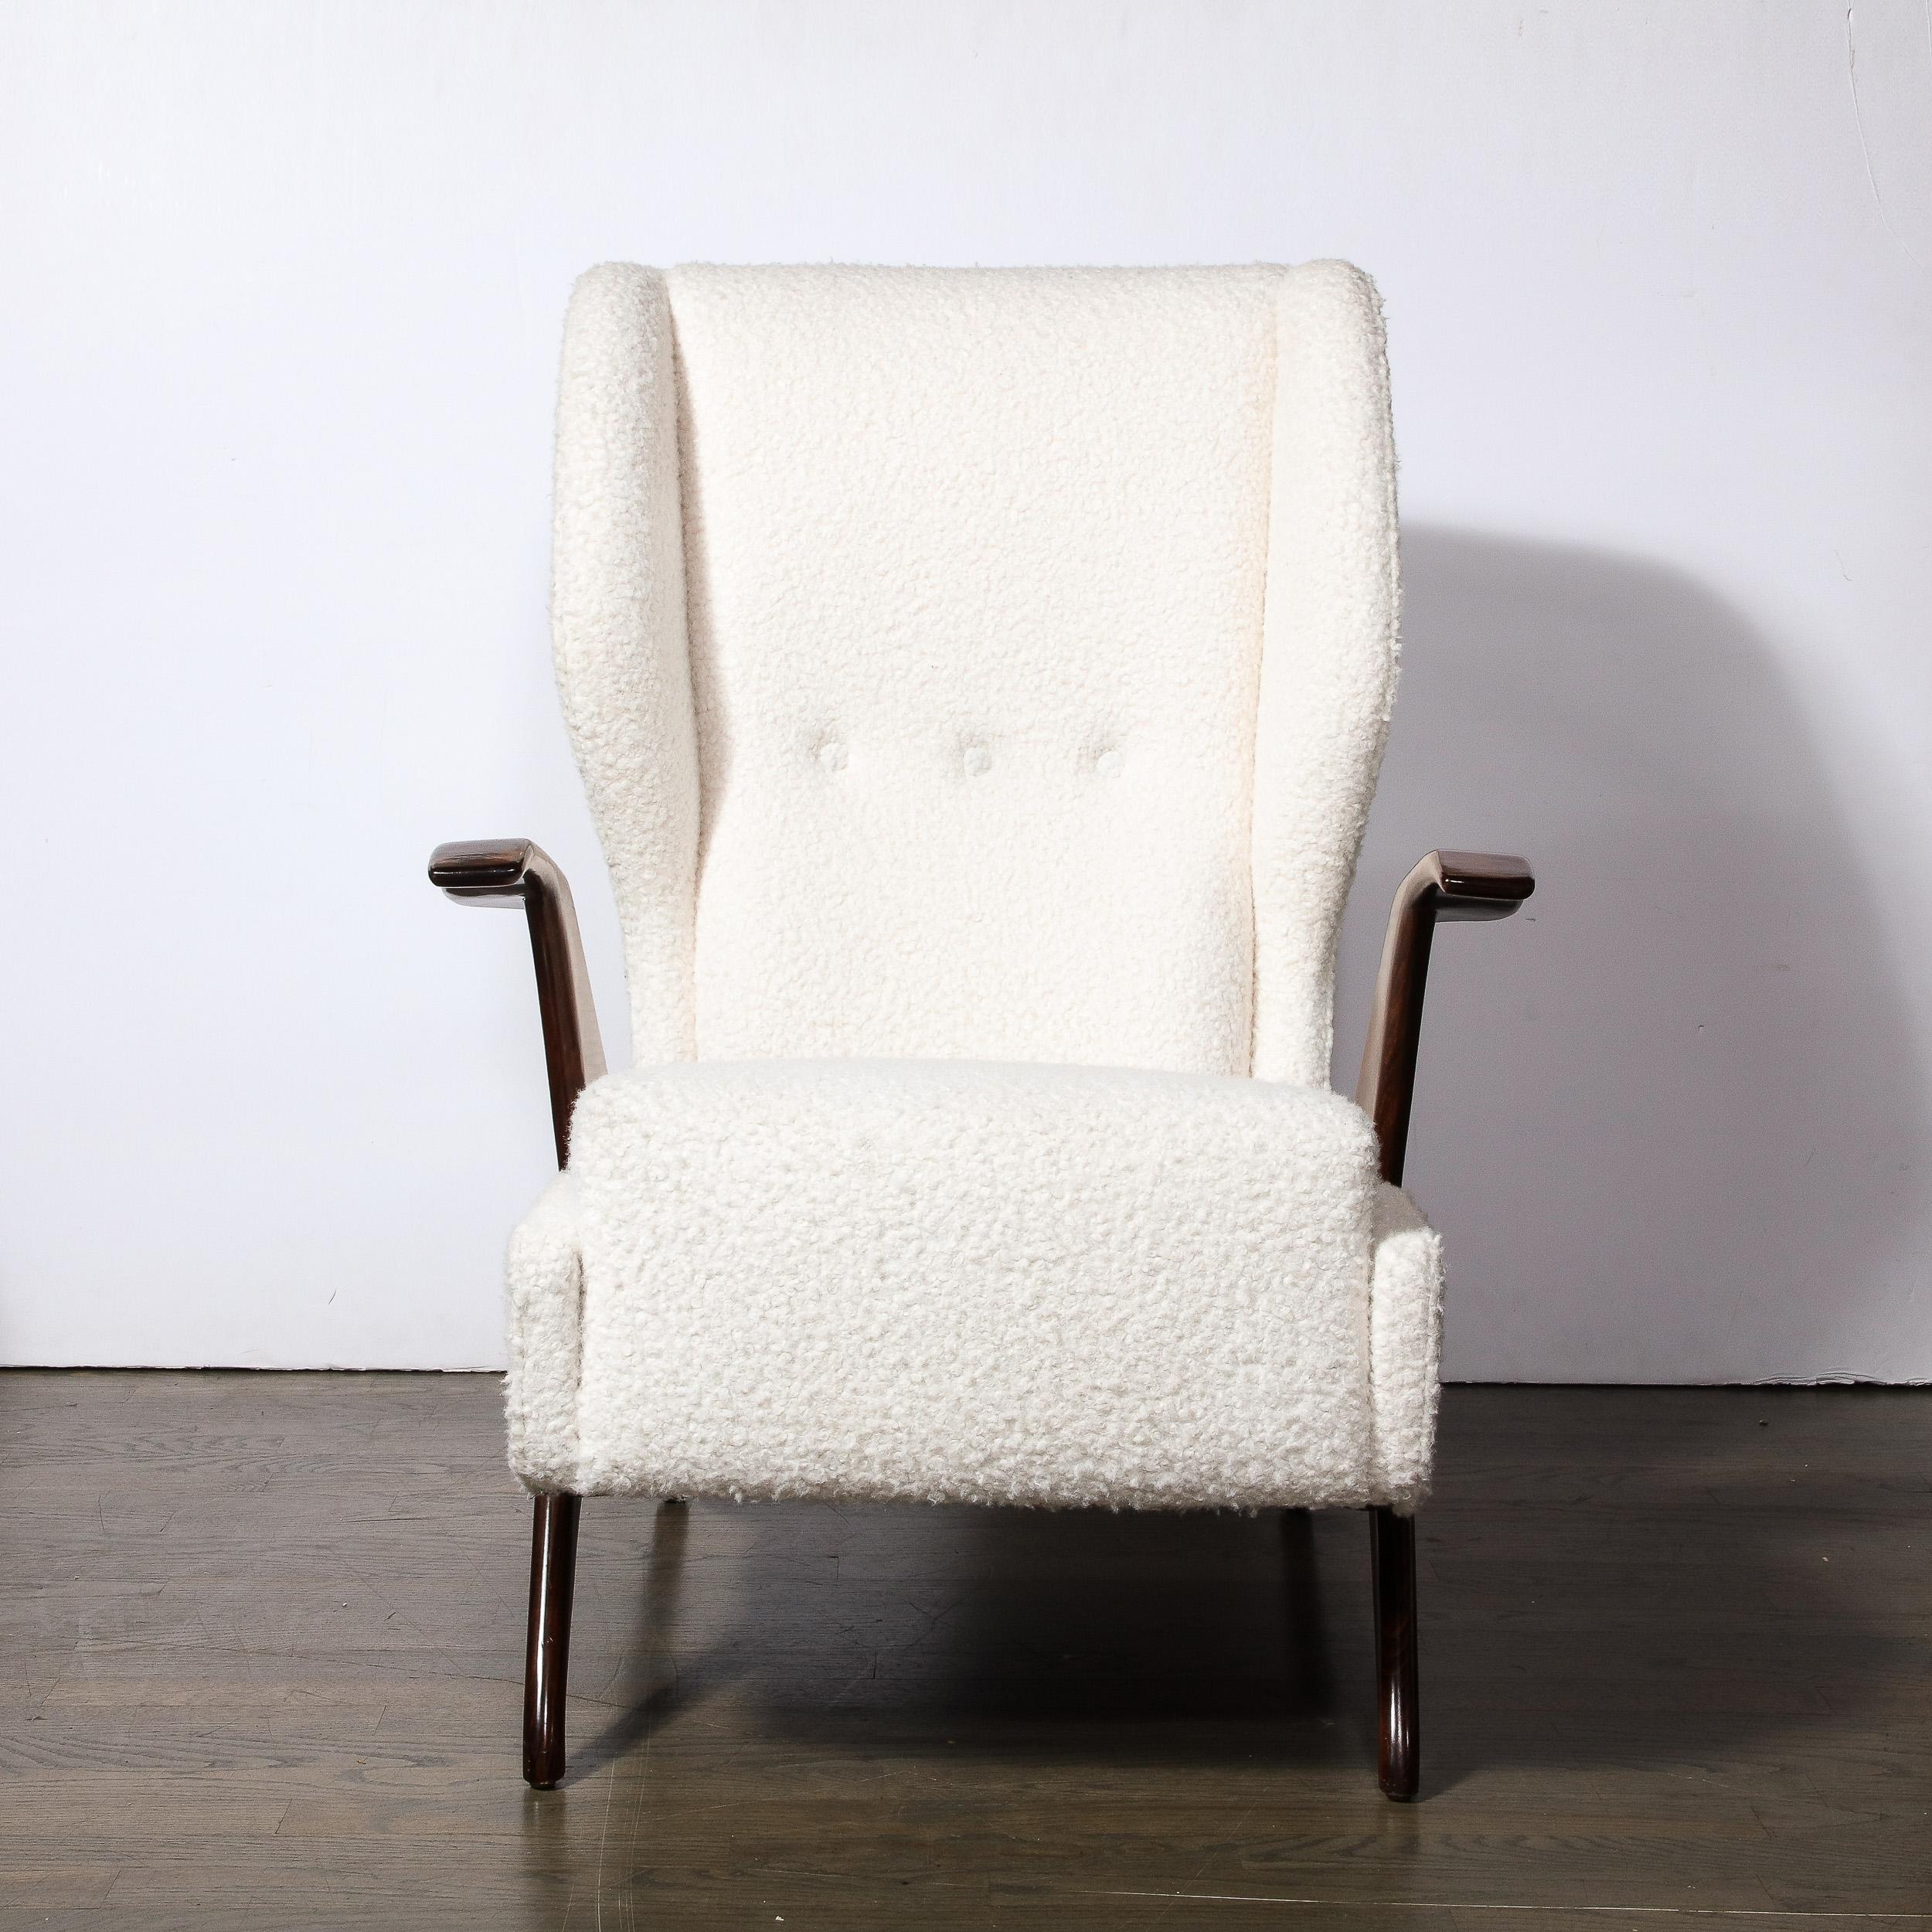 Italian Mid-Century Modernist Sculptural Walnut Arm Chairs in Holly Hunt Boucle Fabric For Sale